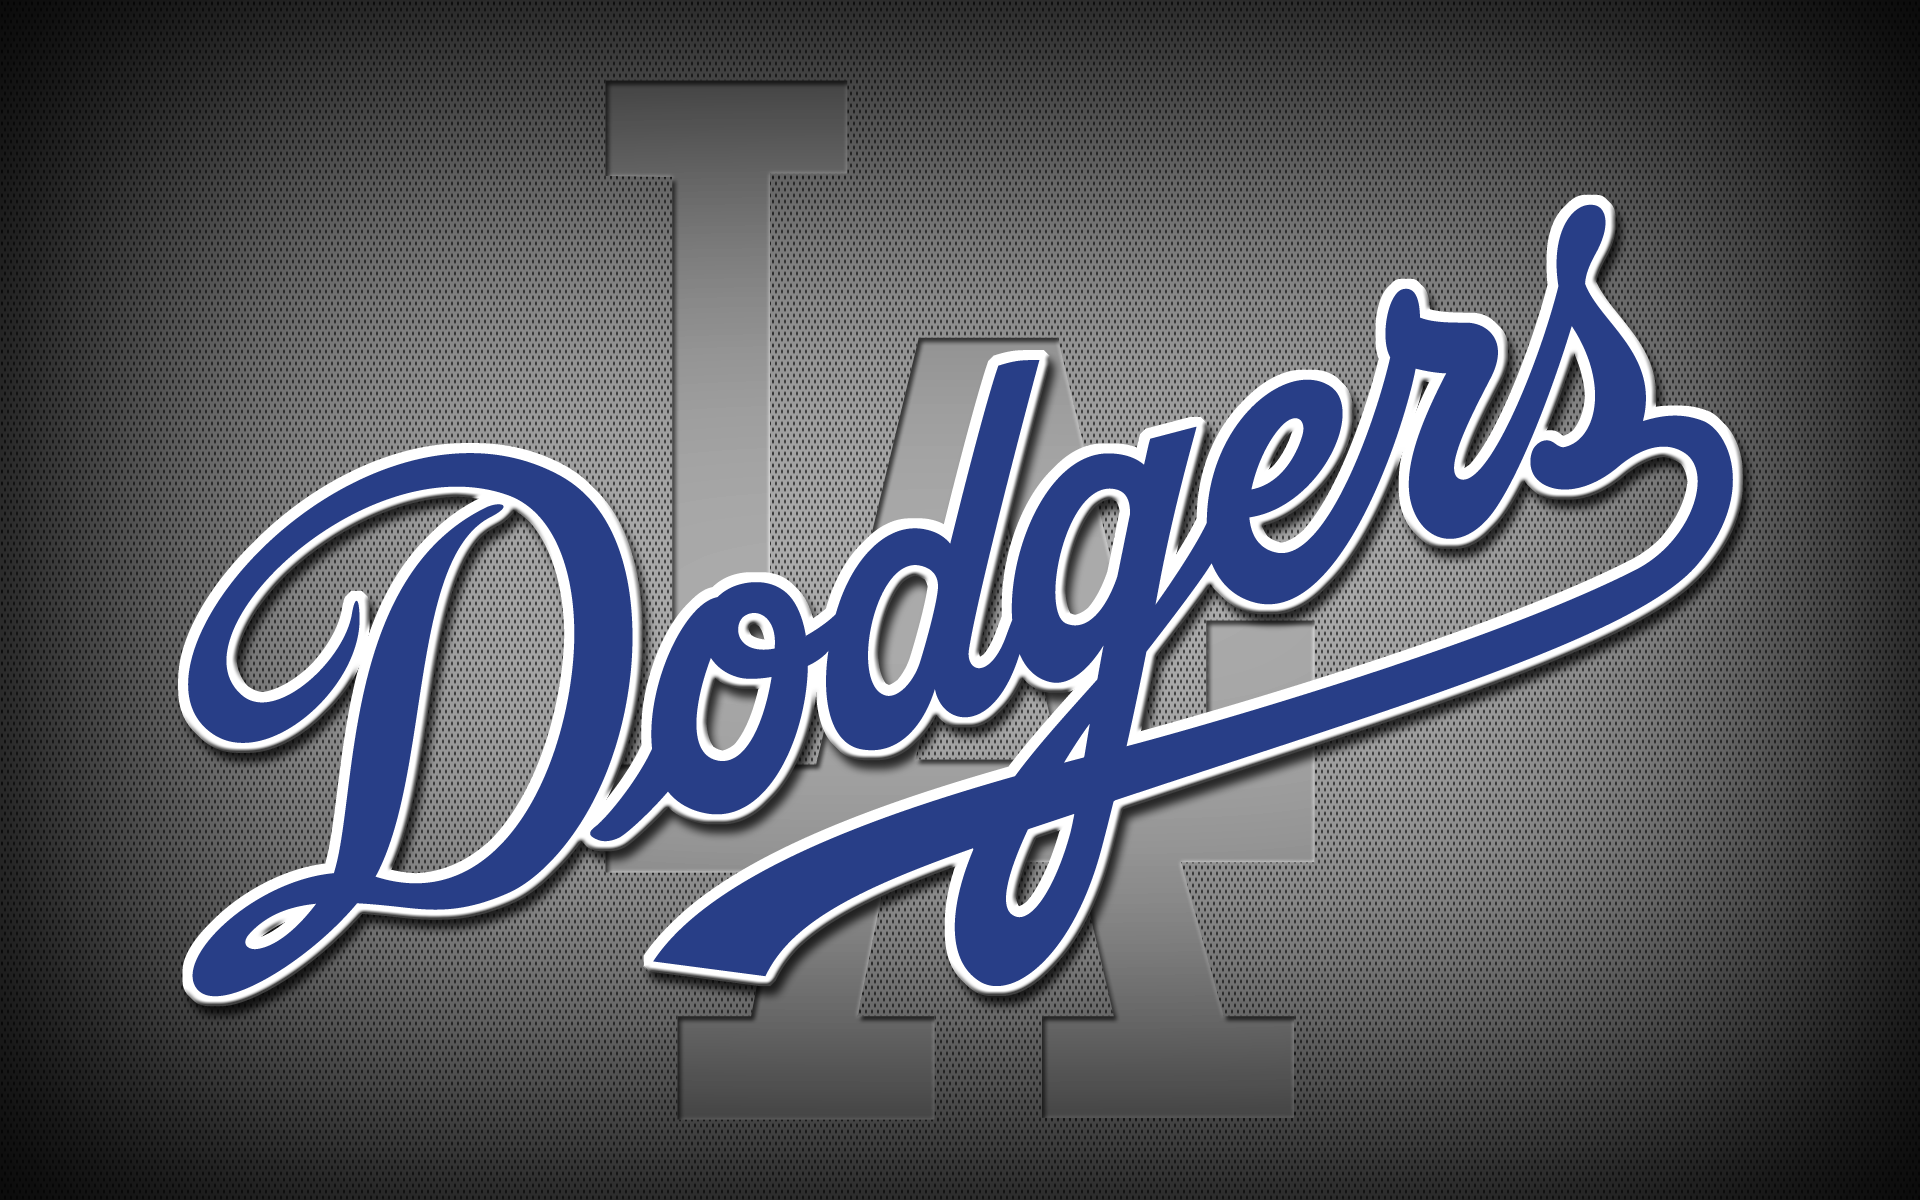 Buy Los Angeles Dodgers Tickets Today